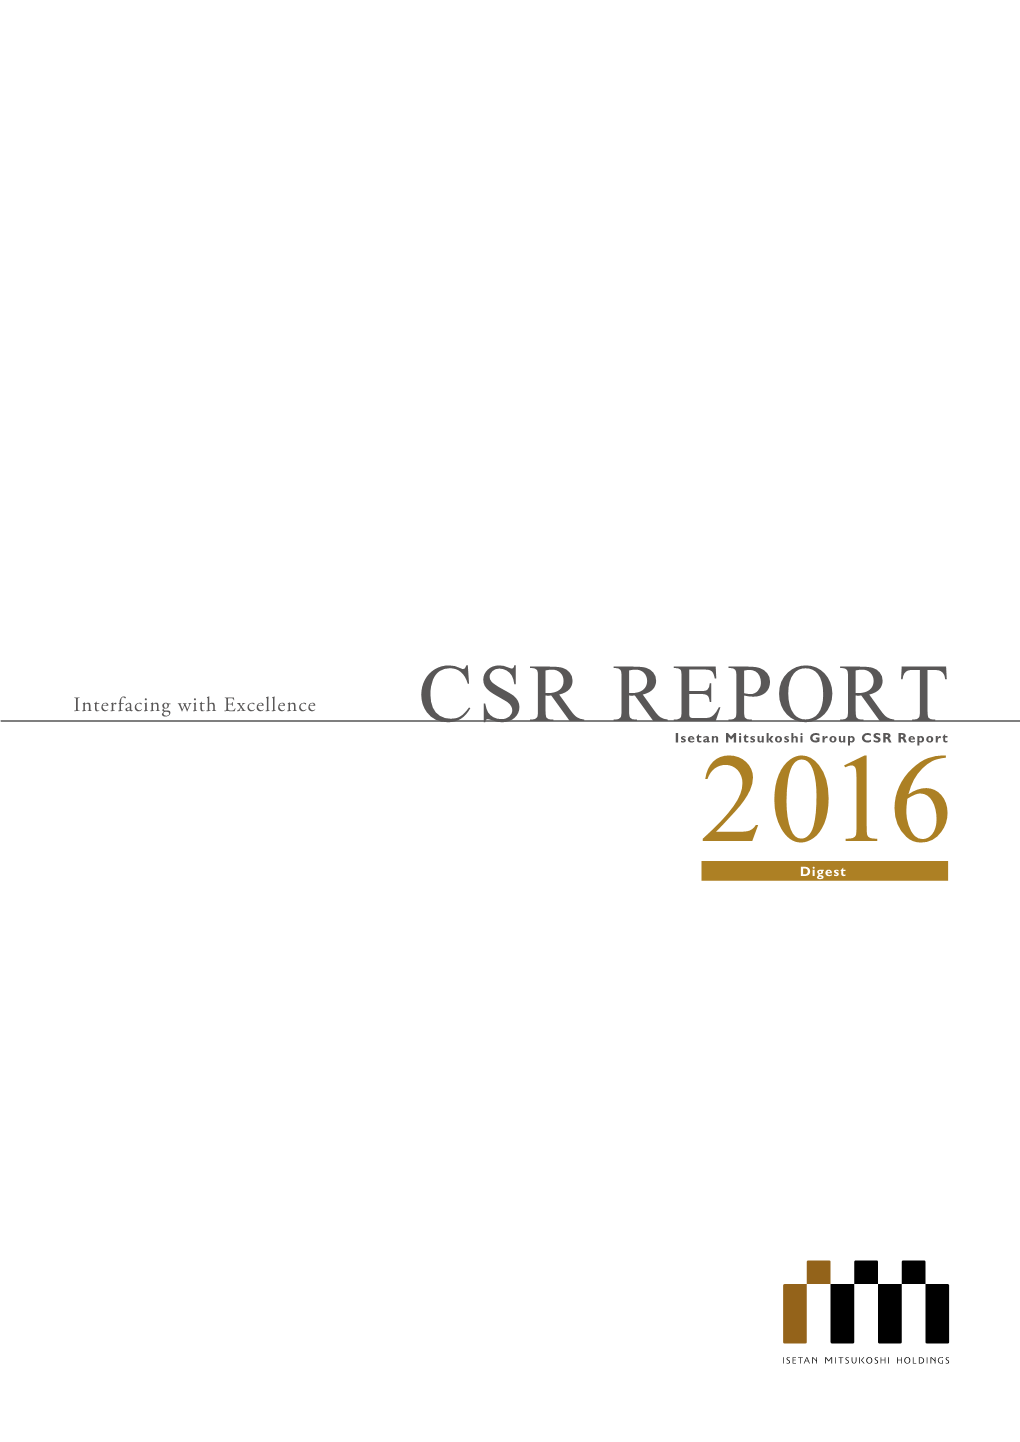 CSR Reportt Green Santa Foundation Recovery Support As a Loyalty Reward) 2,157 Tomonokai Counter at Each Group Store (October 2015 - March 2016)